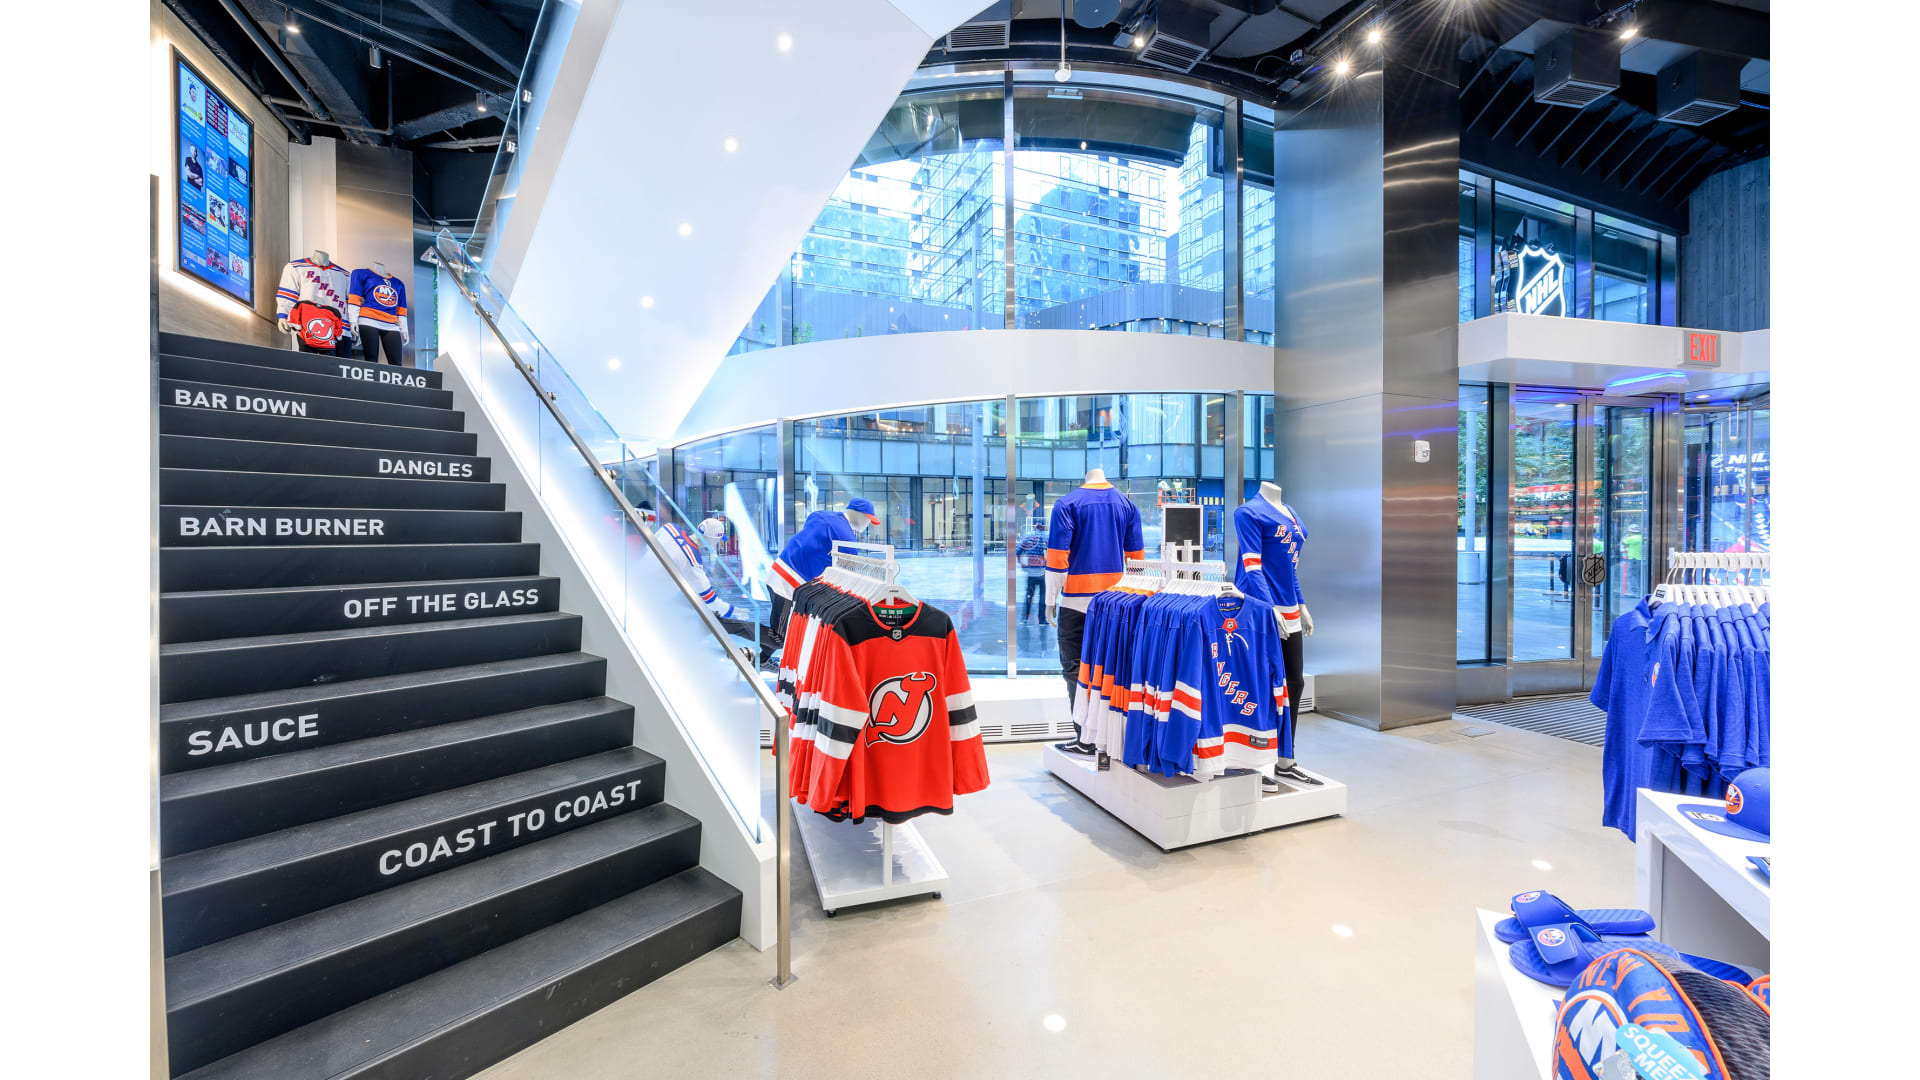 The NHL Store in New York City, for hockey fans 